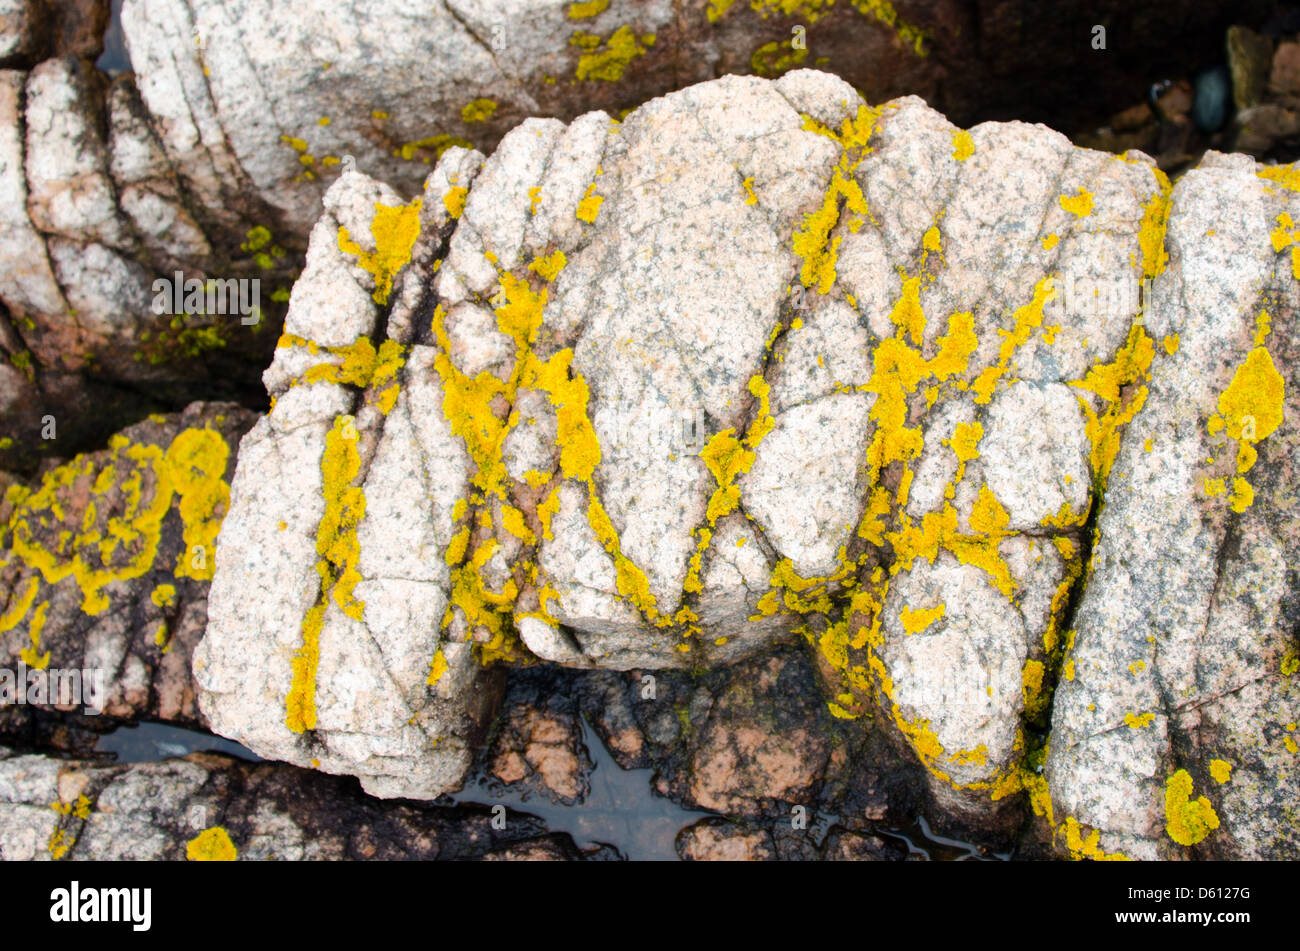 Yellow-orange Xanthoria lichen on pink granite outcrops with tidepools, Ship Harbor Nature Trail, Acadia National Park, Maine. Stock Photo